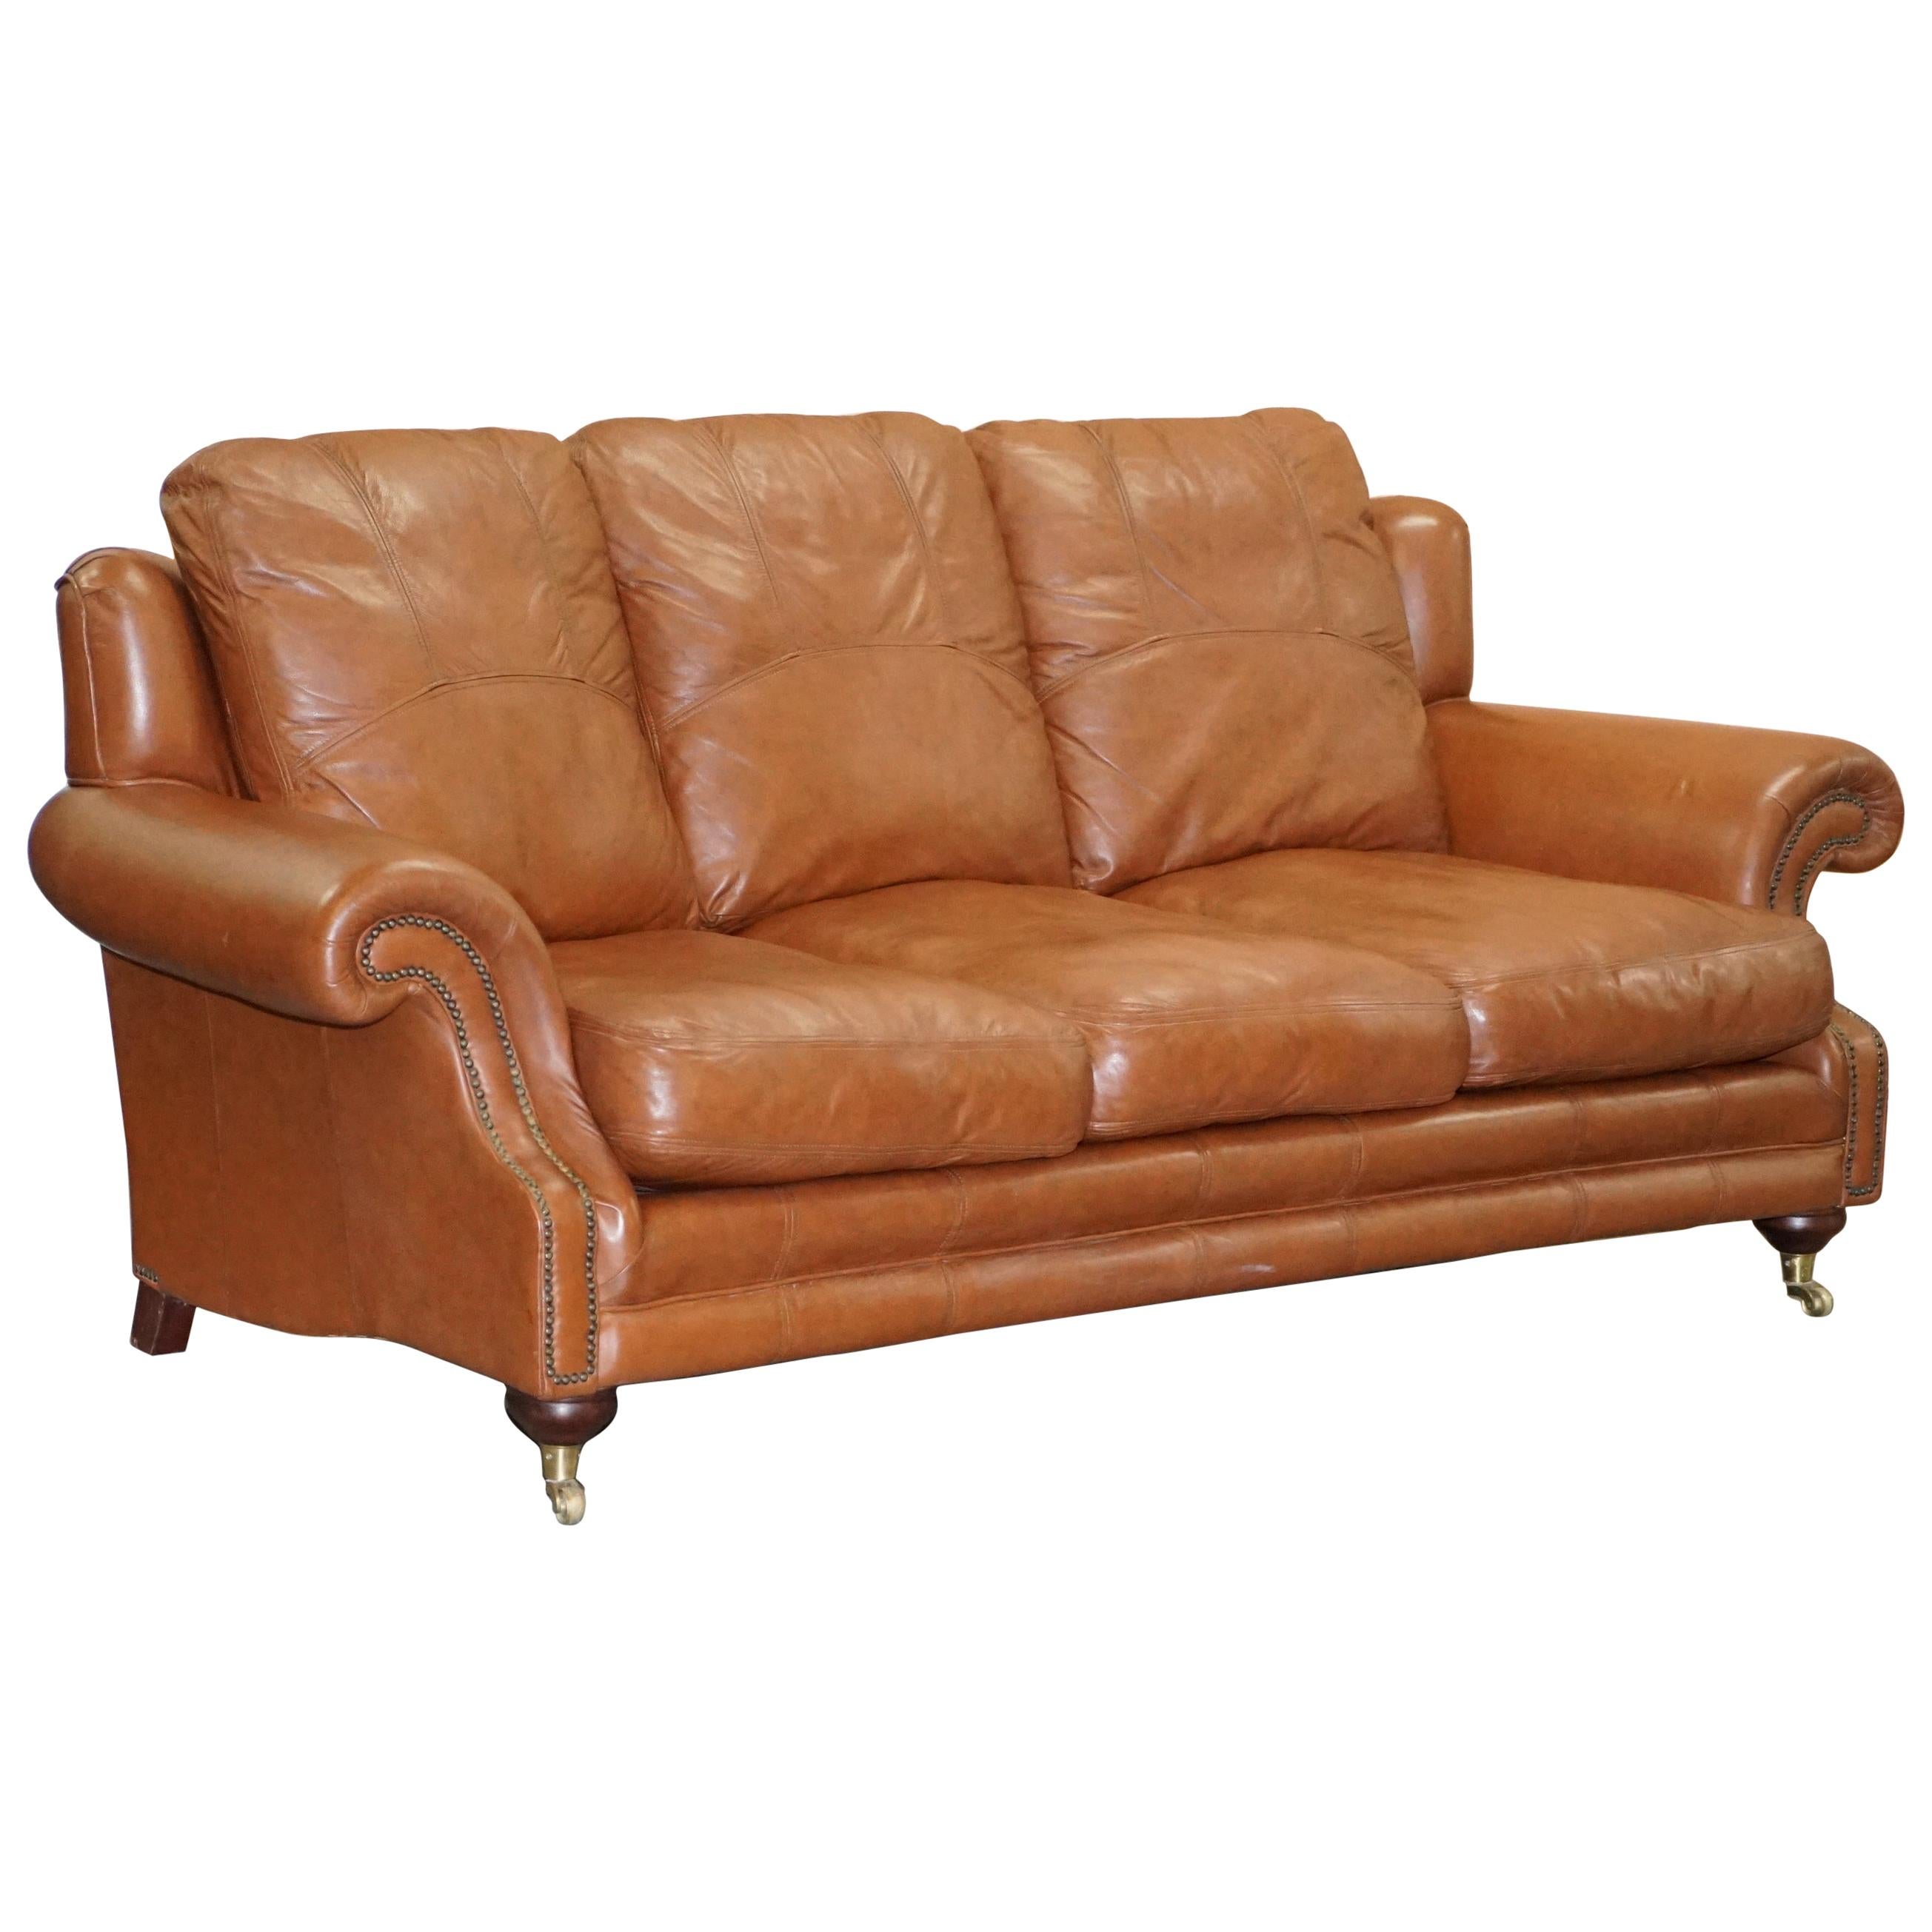 Medallion Upholstery Brown Leather Three-Seat Sofa Part of Large Suite